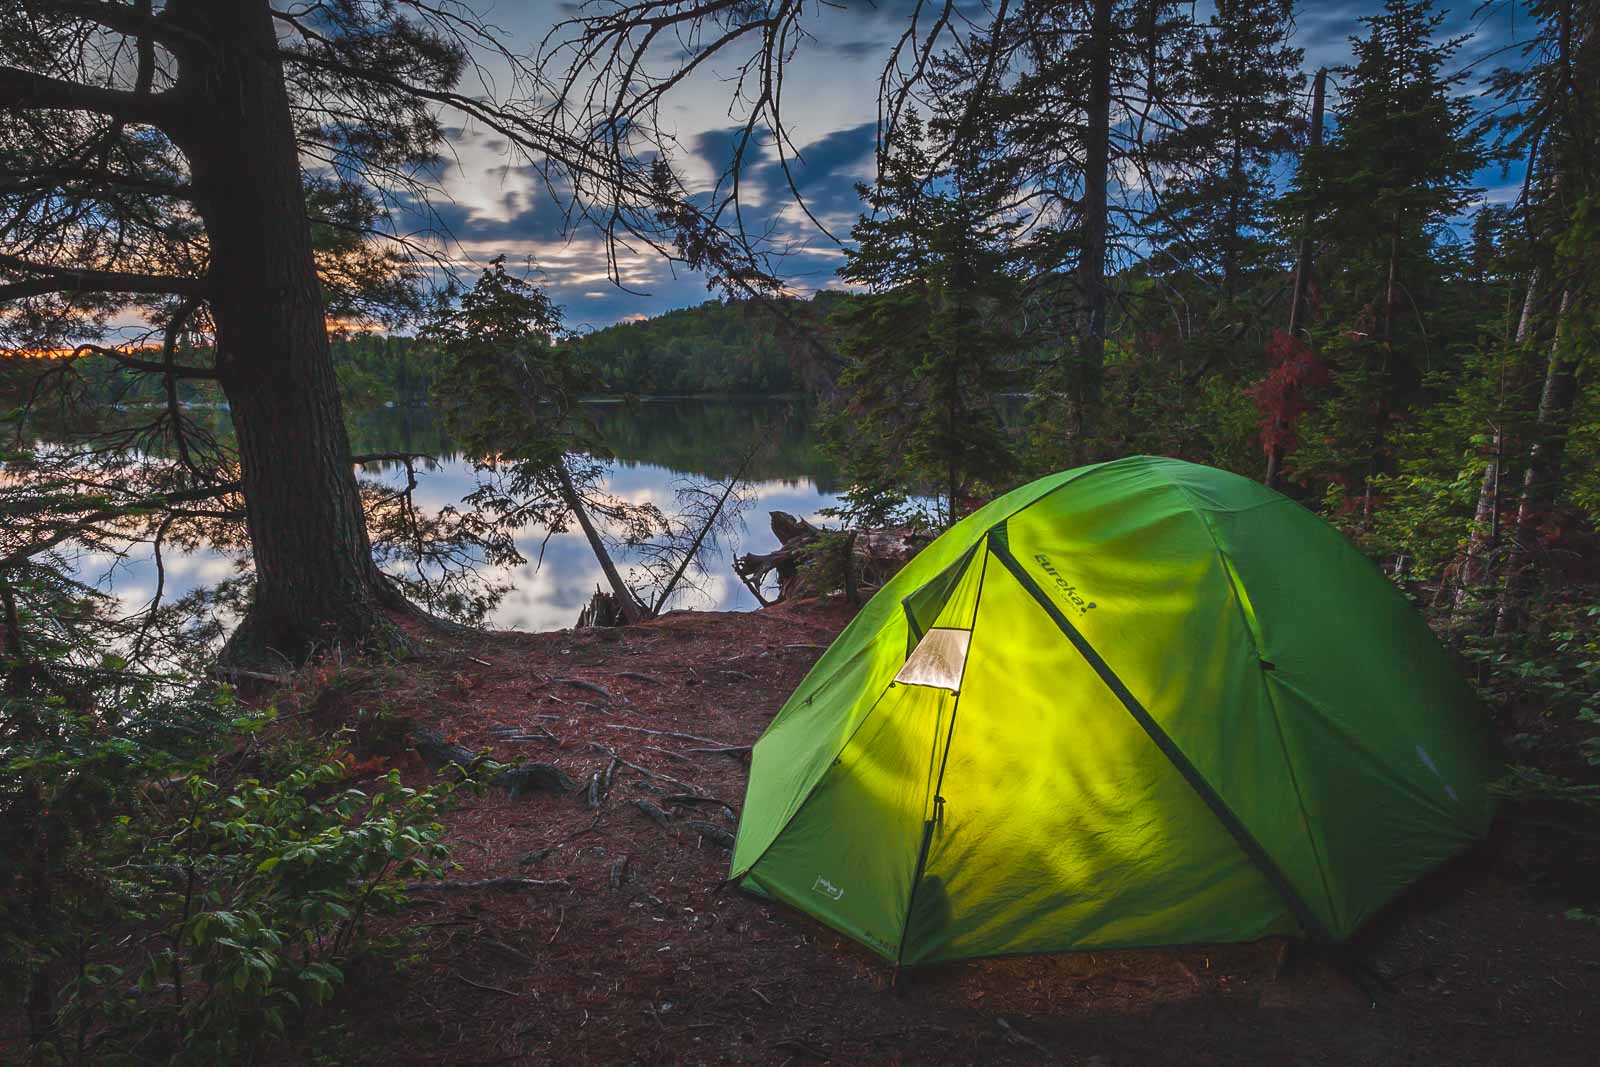 20 Camping Tips and Tricks - The Idea Room